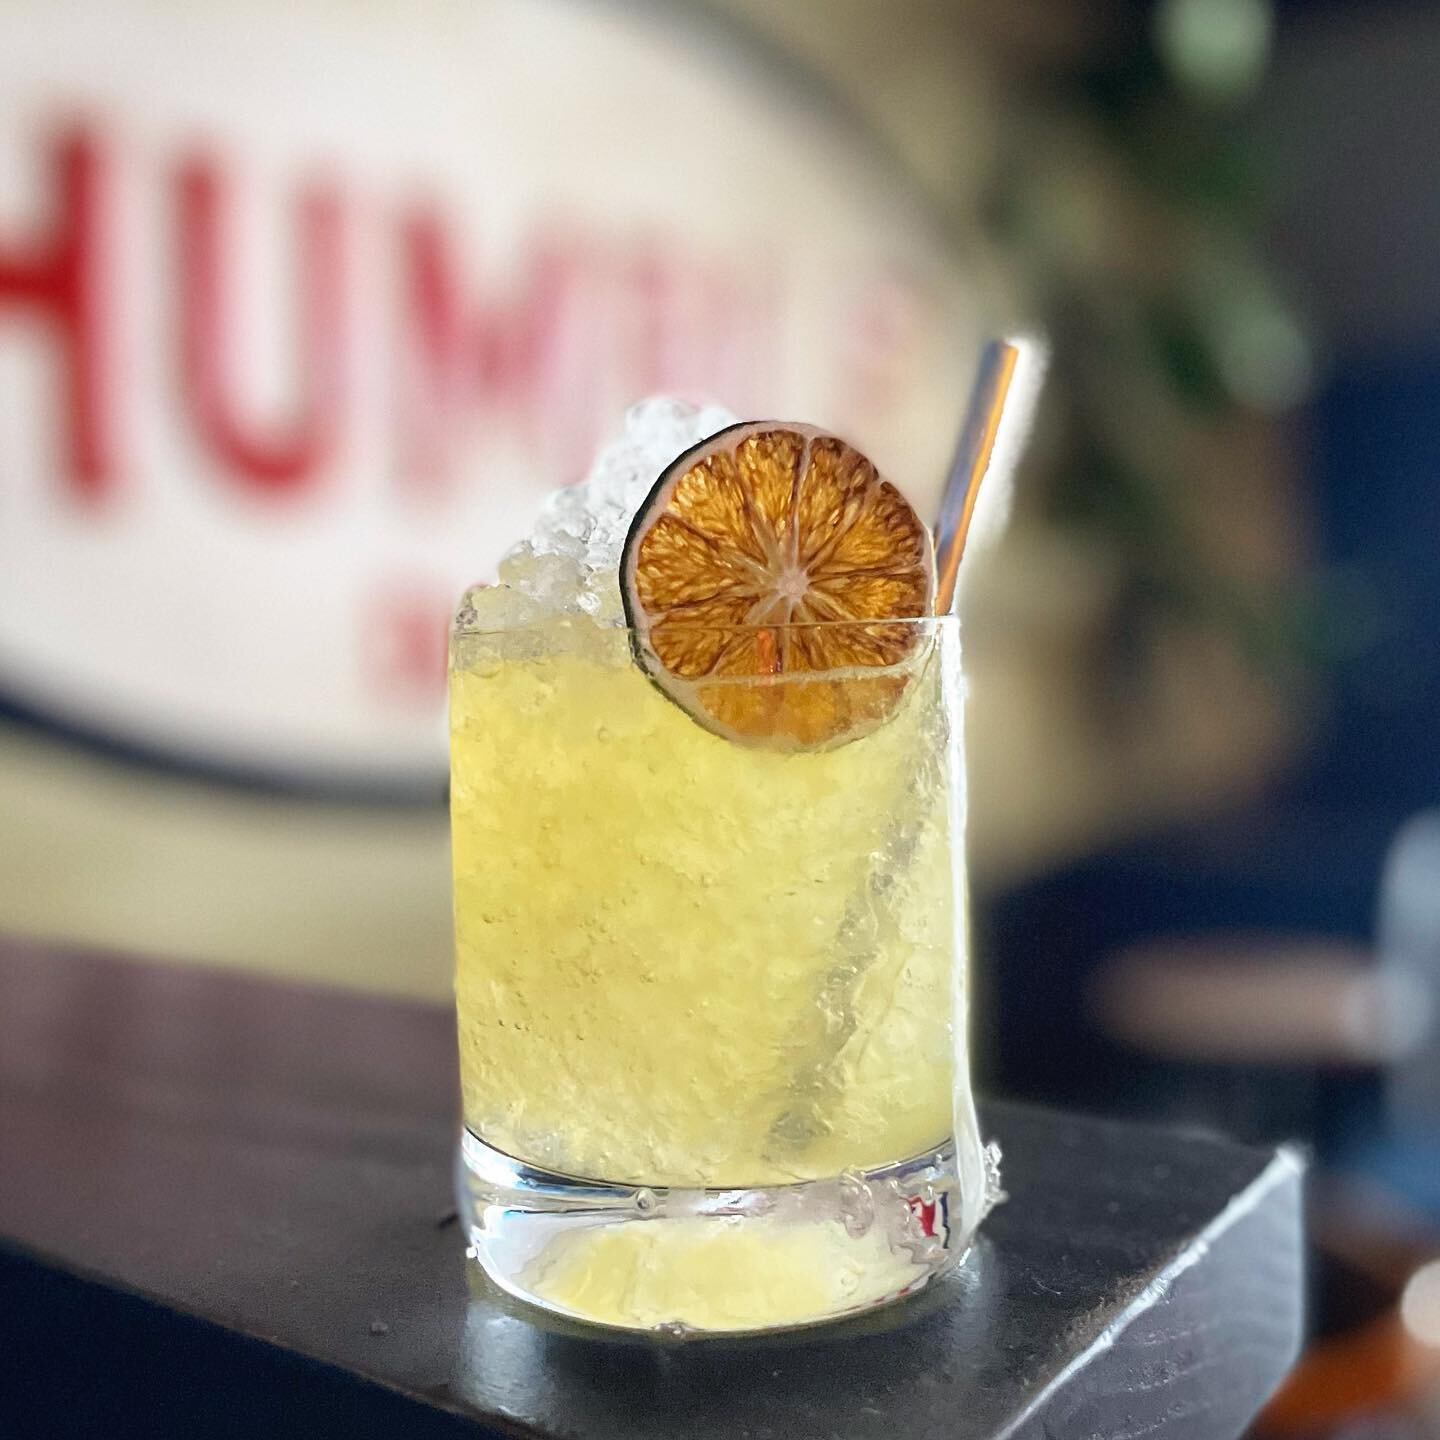 Everyone deserves a little treat during the week!

𝐆𝐮𝐢𝐥𝐭𝐲 𝐏𝐥𝐞𝐚𝐬𝐮𝐫𝐞 🍹❤️&zwj;🔥
Patr&oacute;n Reposado 
Lime
Passionfruit 
Cointreau 
Cacao
Housemade Spicy Bitters 

A pure delight that&rsquo;s refreshing with bit of a bite. You won&rsqu